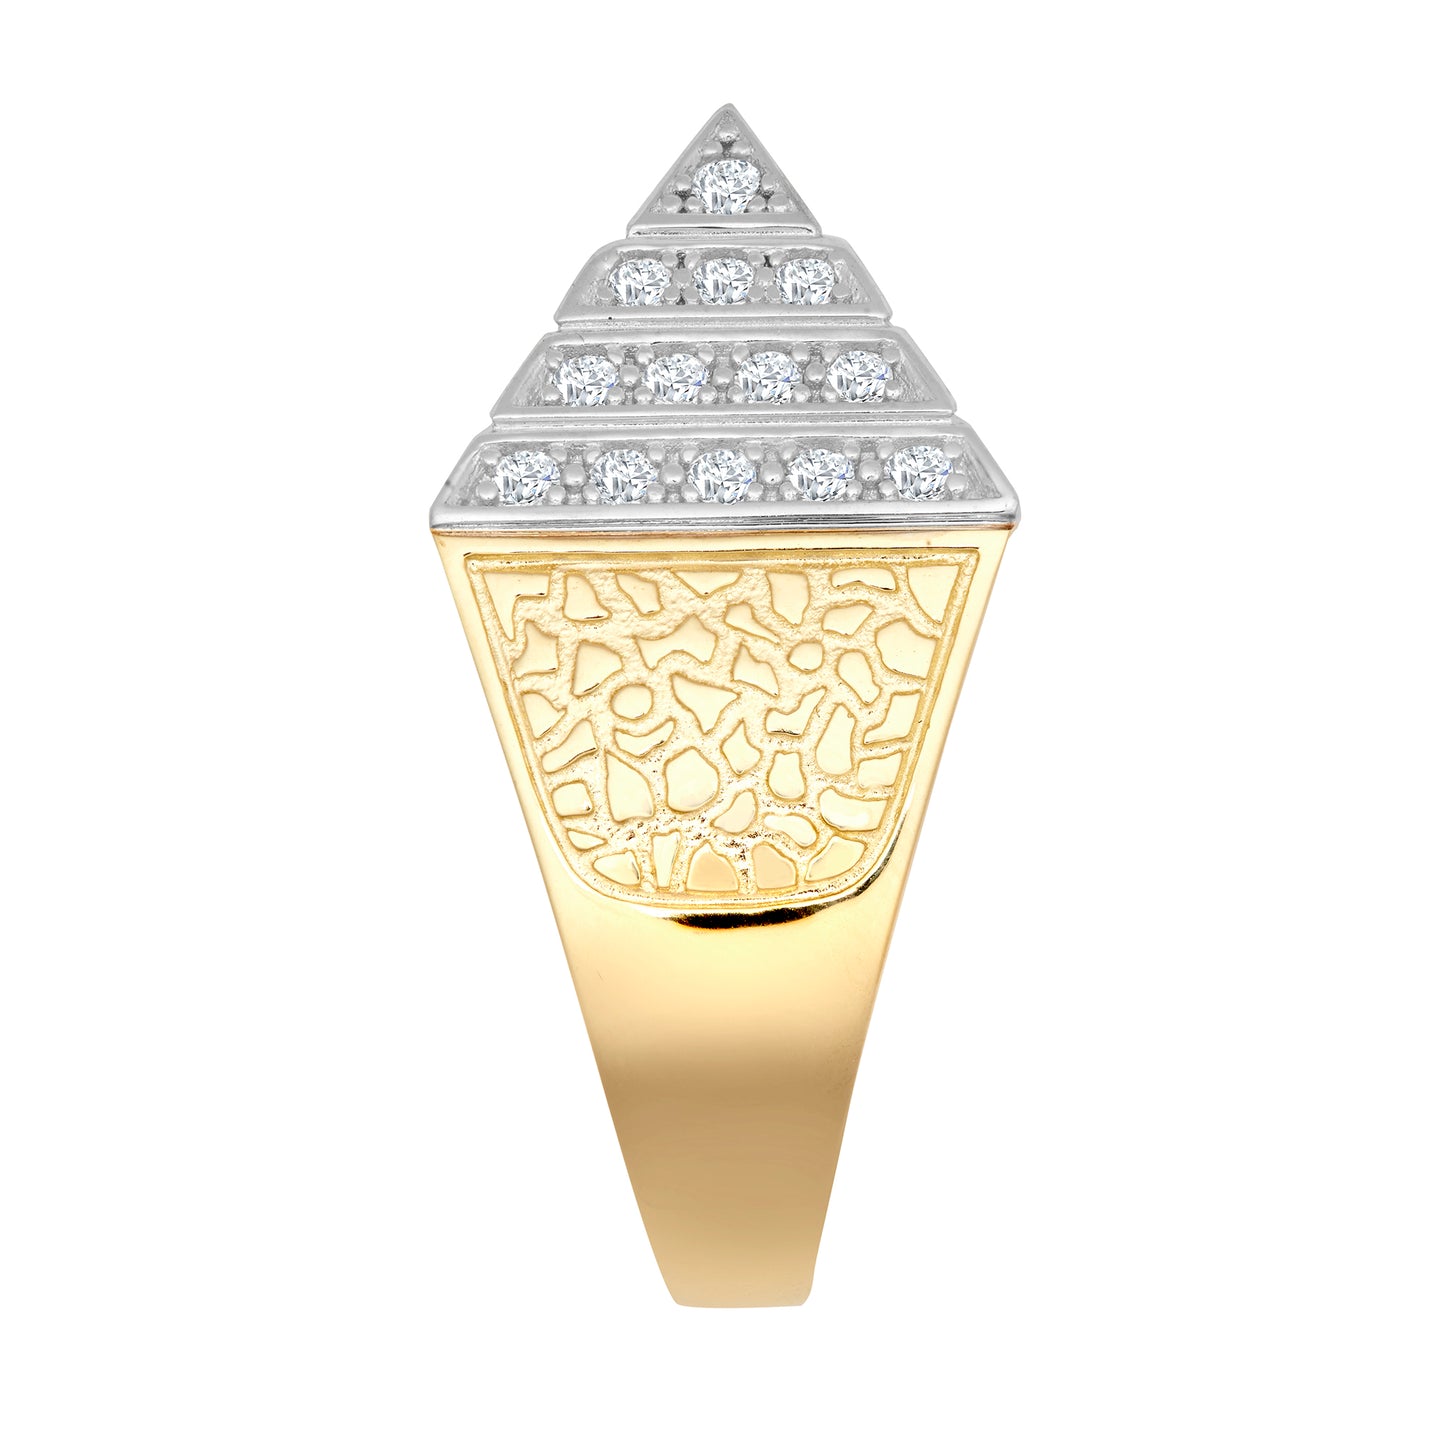 9ct 2-Colour Gold  CZ Egyptian Pyramid 1/2oz 20mm Signet Ring - JRN563